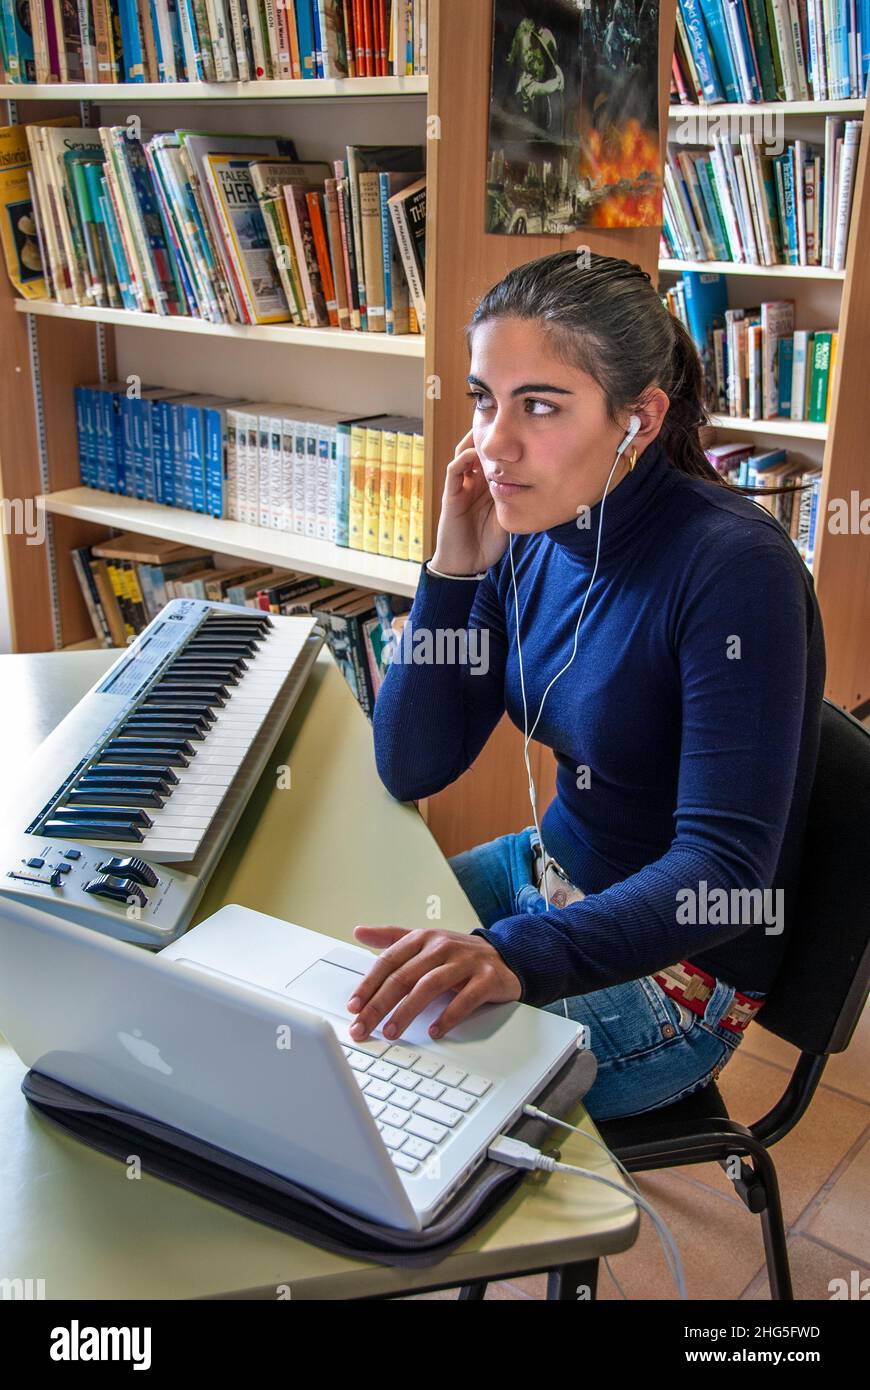 Senior teenage Hispanic girl school student with earphones listening & composing with laptop computer and electronic music keyboard in school library Stock Photo